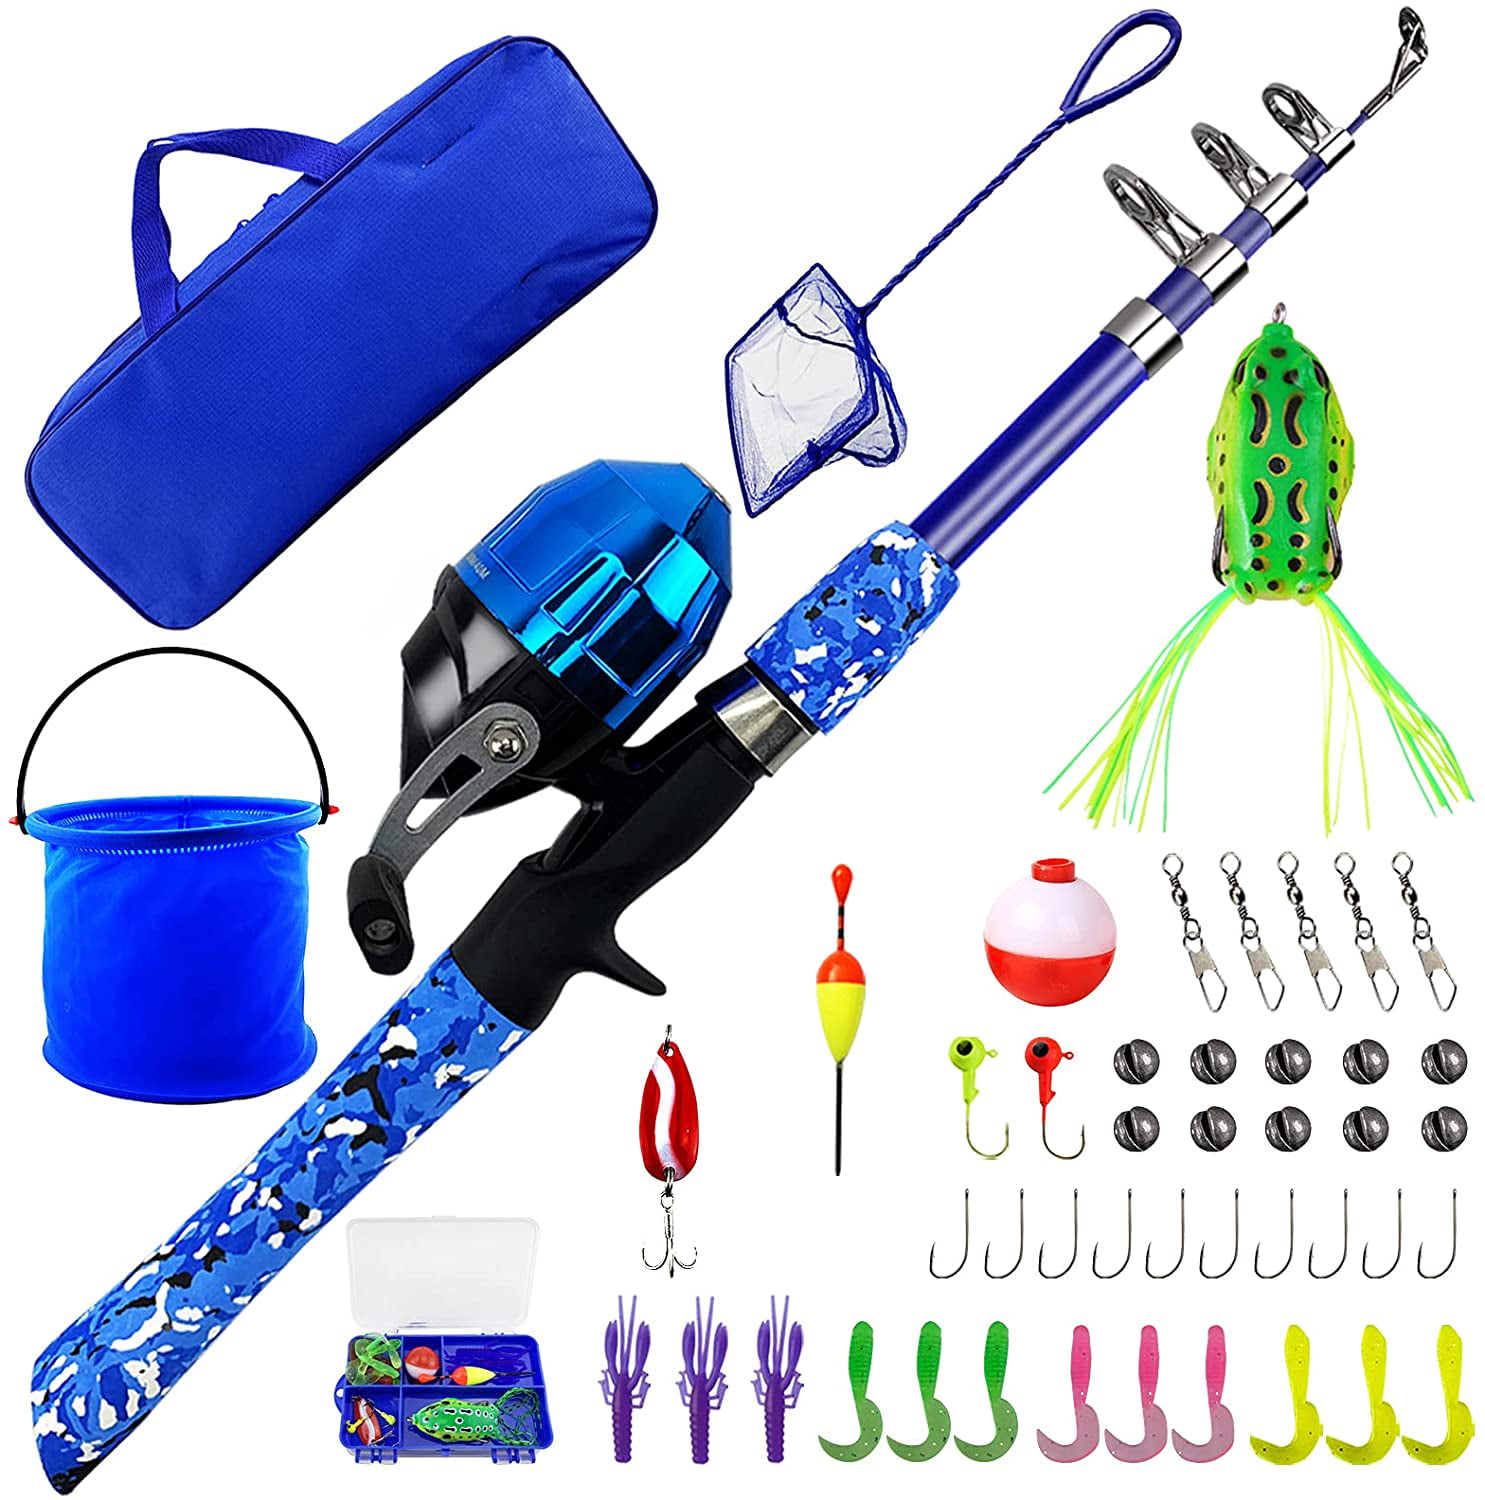 Magreel Kids Fishing Pole Telescopic Portable Kids Fishing Rod Kit with Fishing Line Fishing Gears Travel Bag for Boys Girls or Youth 